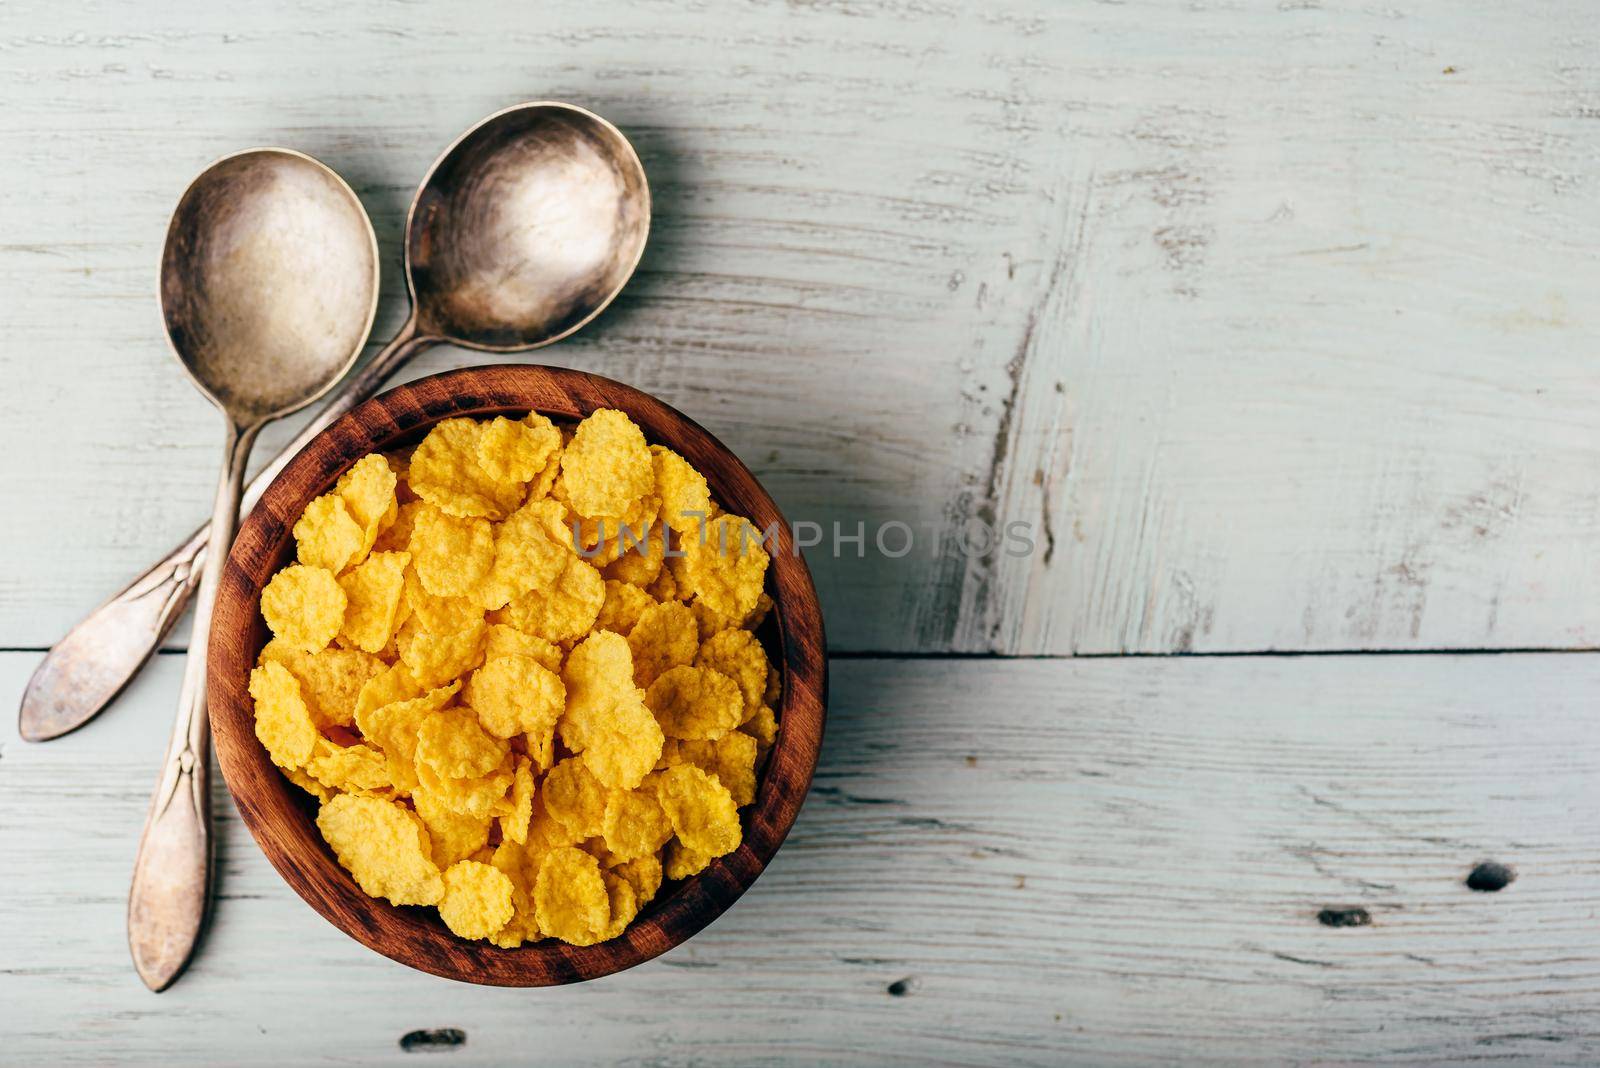 Rustic bowl of corn flakes with spoons on a wooden surface